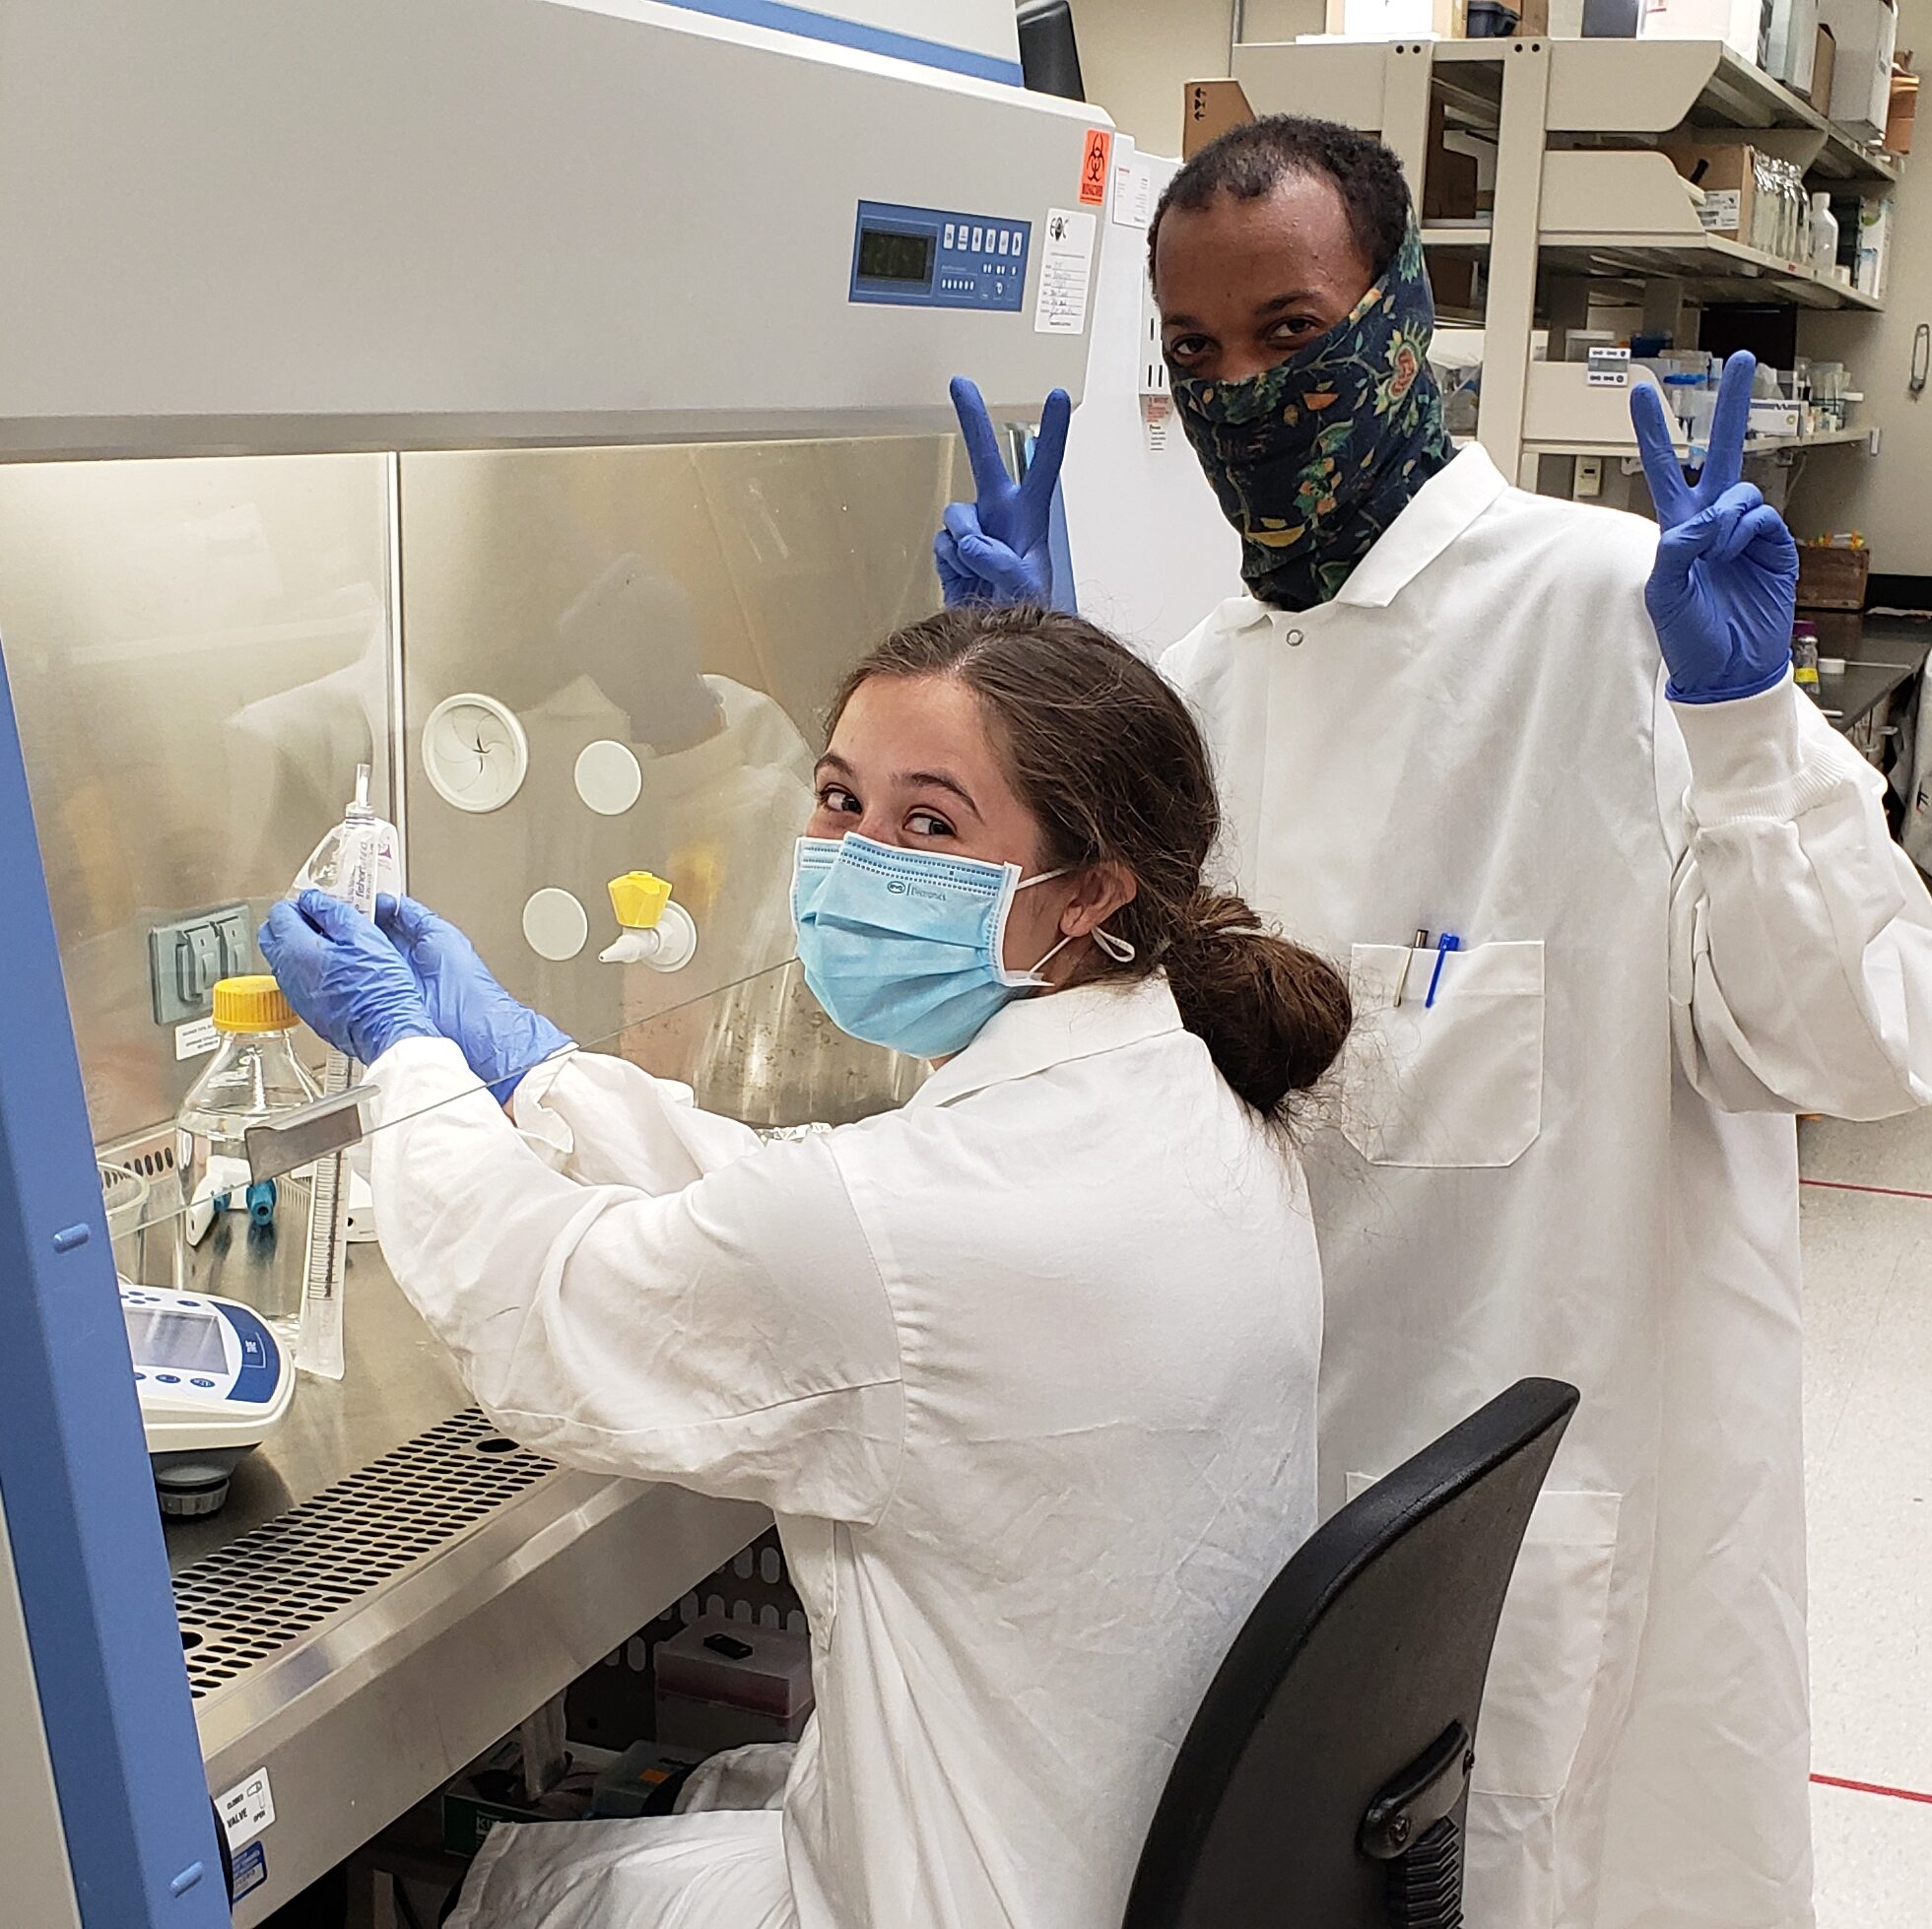 Addison and Lovell pose for the camera while working in the lab